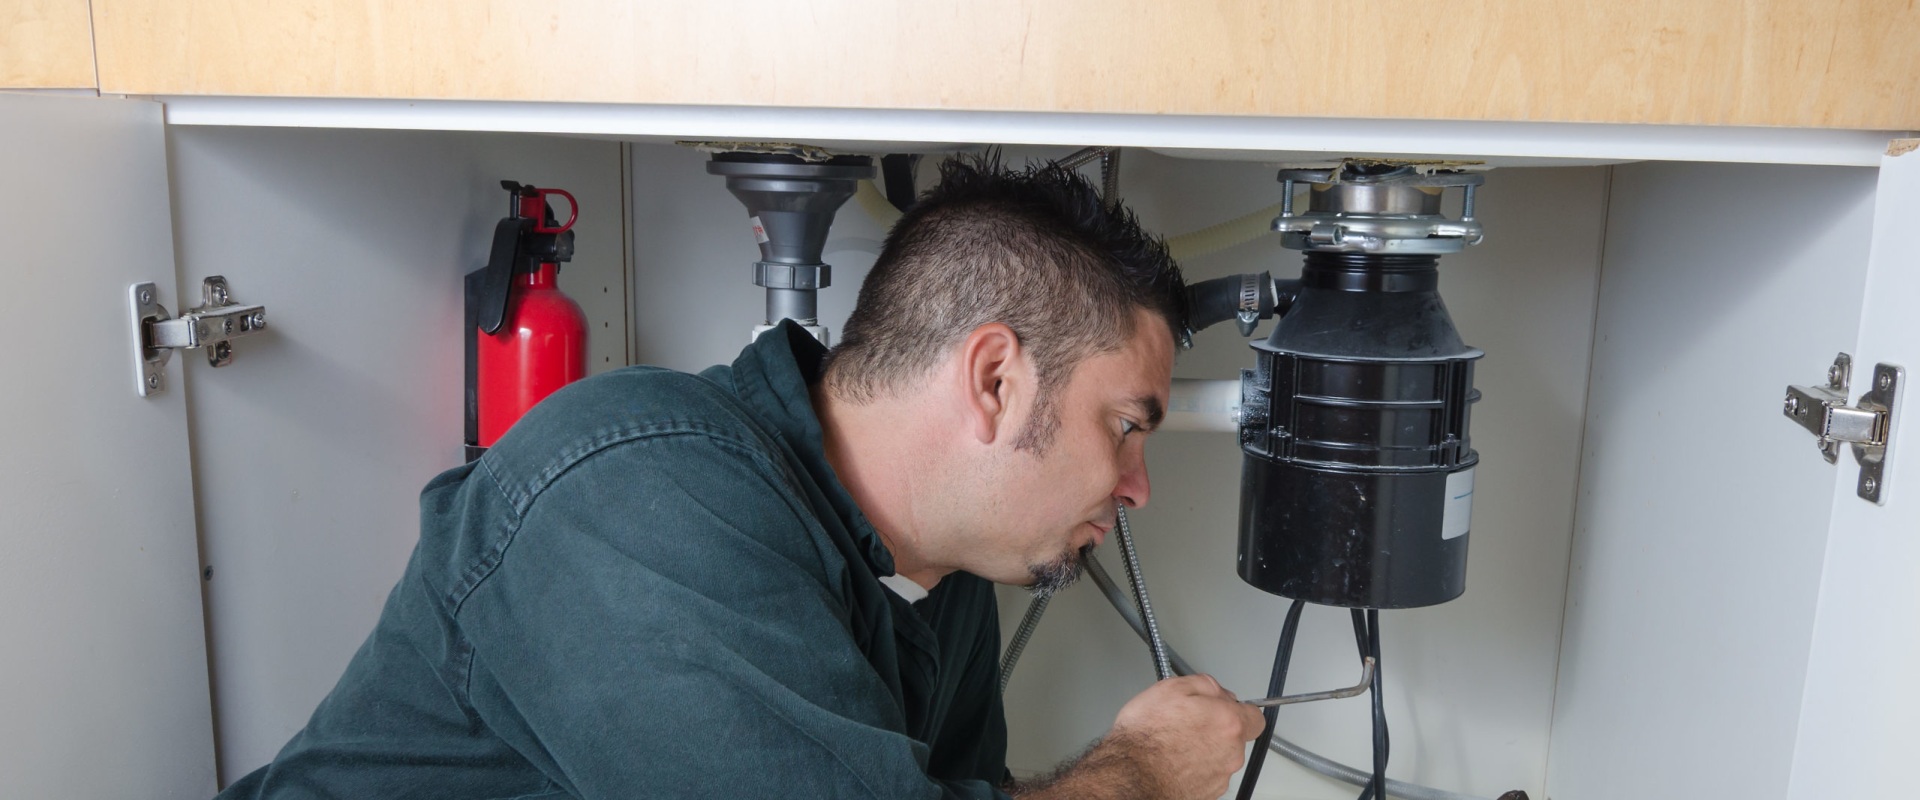 Installing Faucets and Garbage Disposals